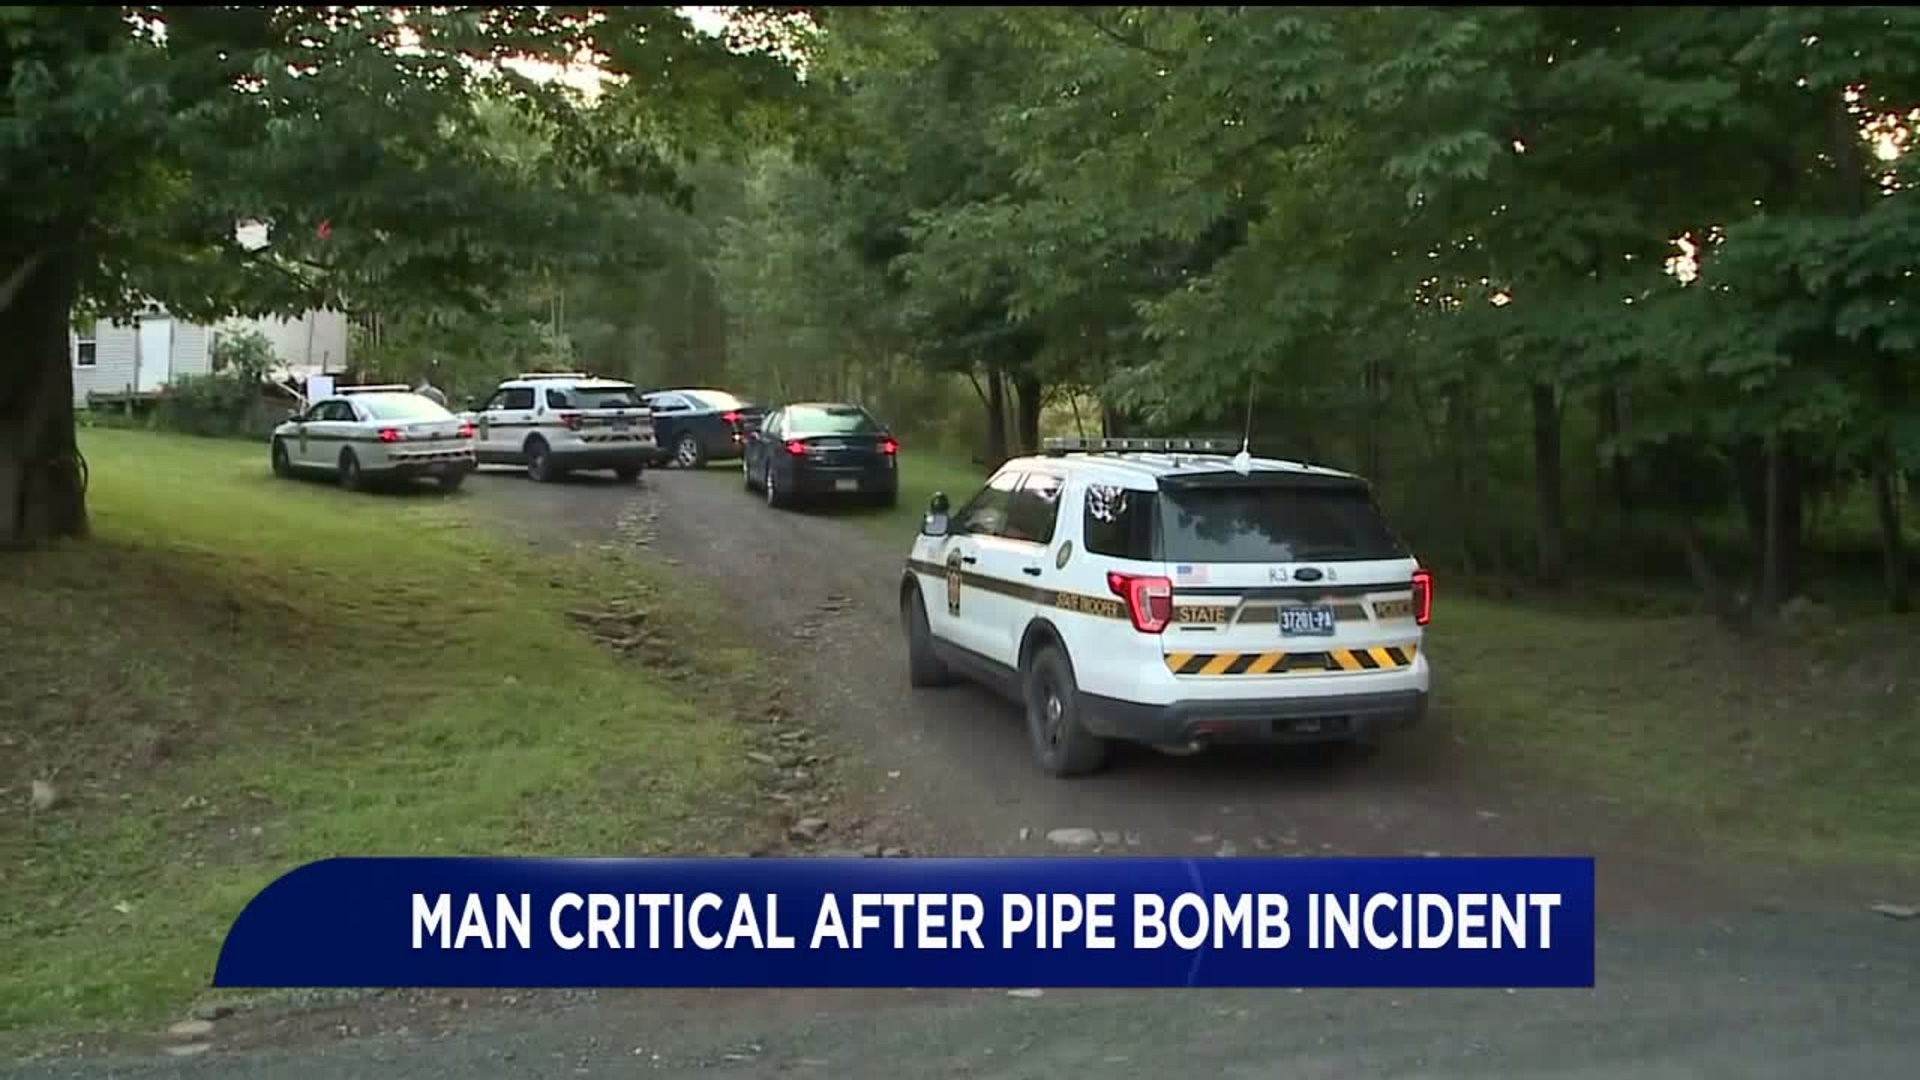 Police: Wayne County Man Injured by Explosive Device